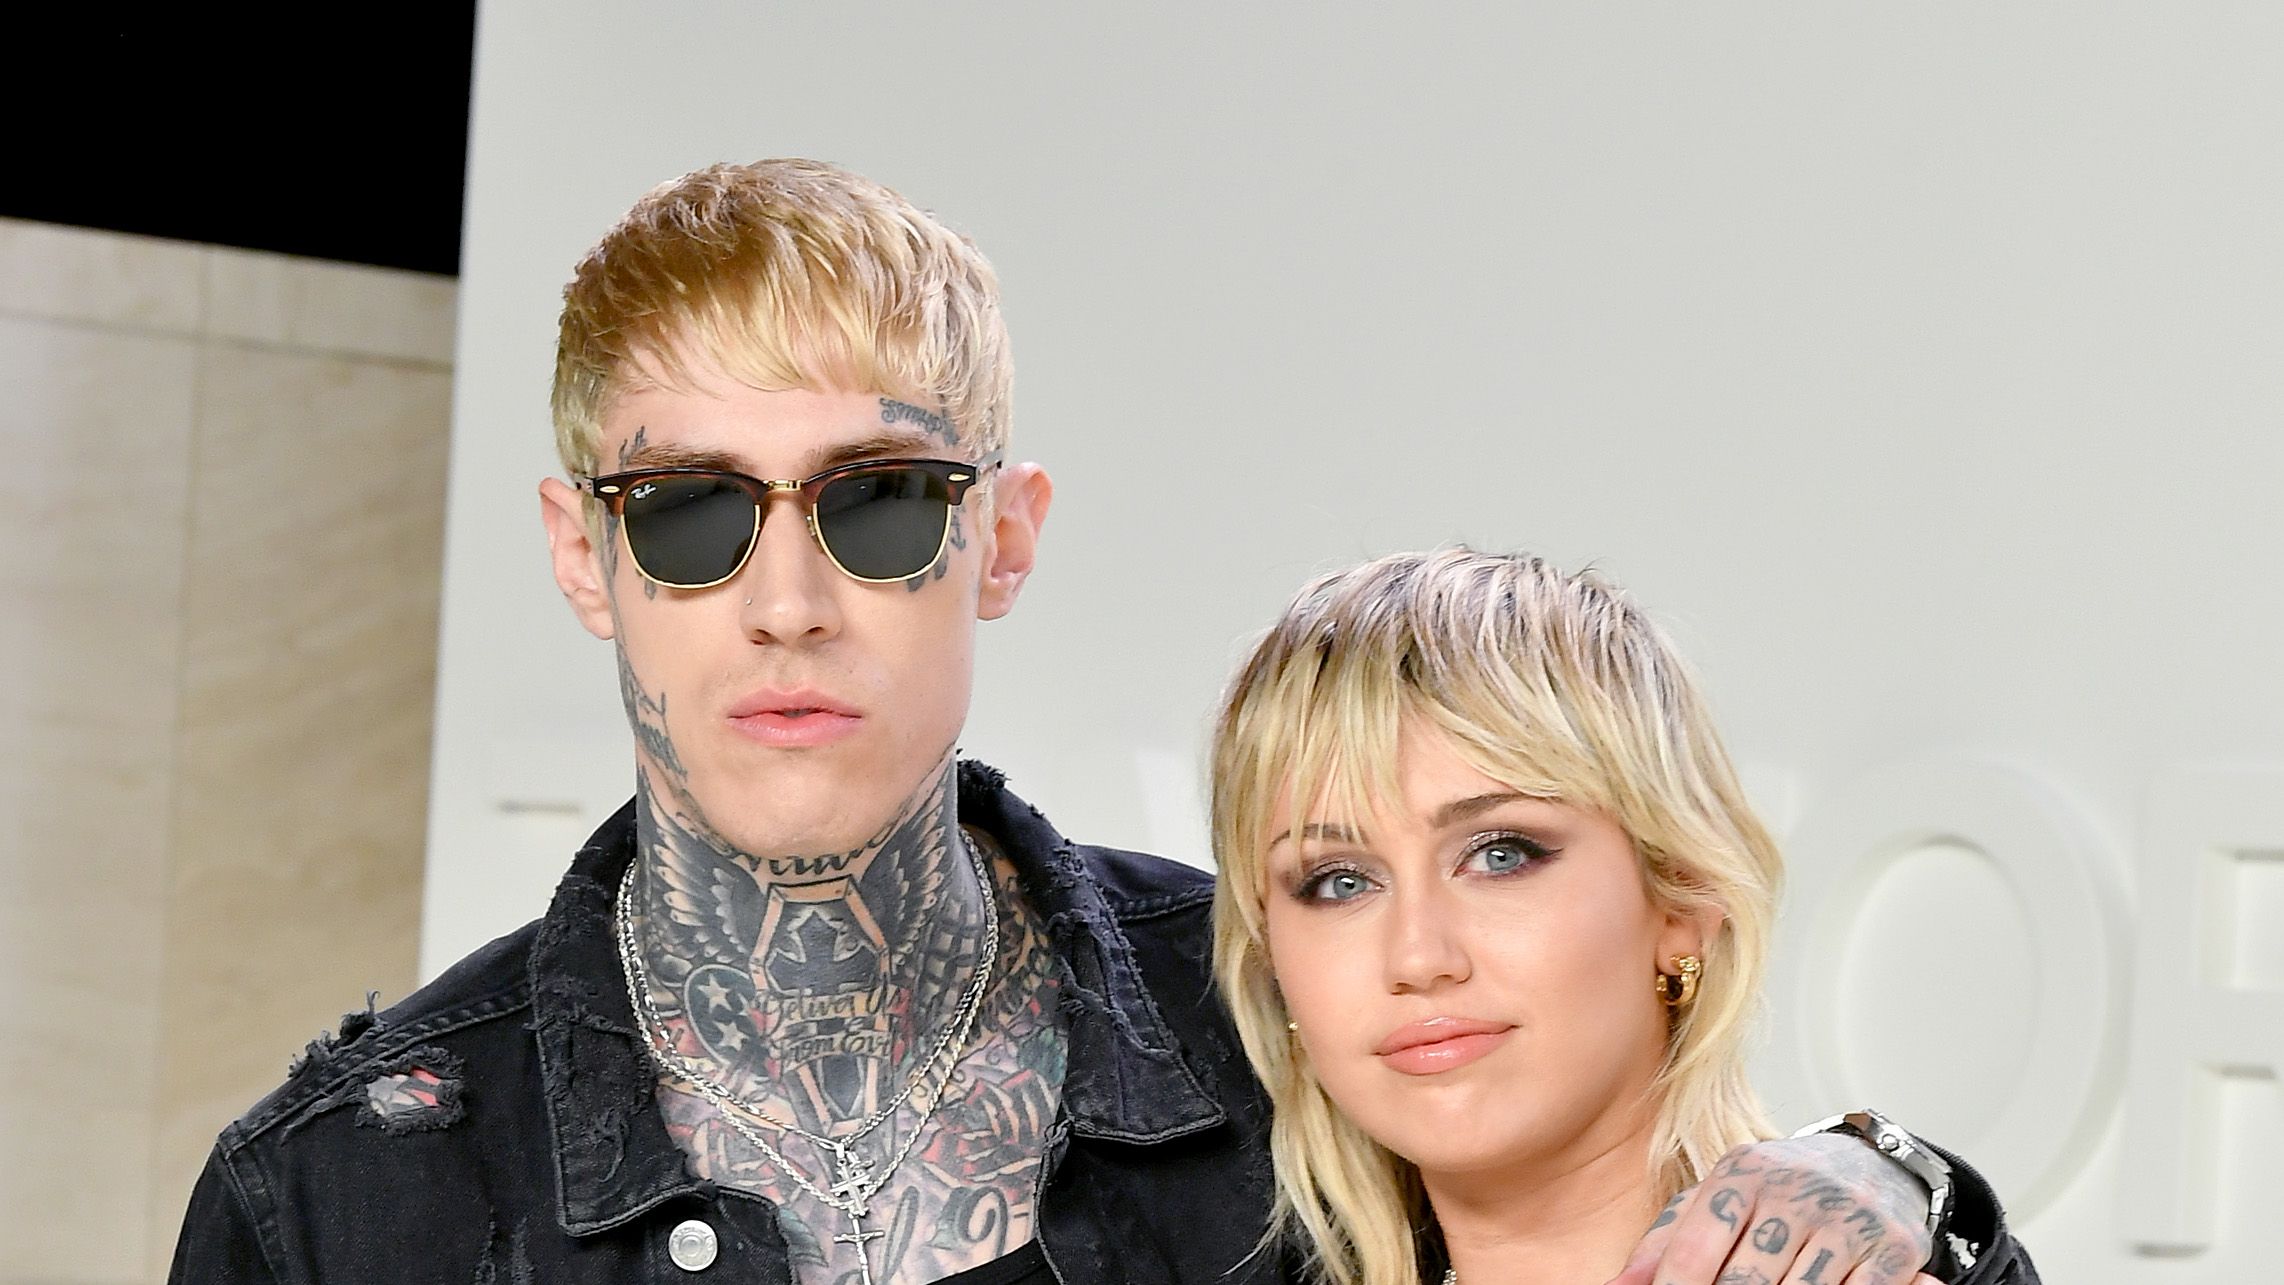 Xxx Jks Hd Vidio - Trace Cyrus Makes Rare Comments About Famous Family on Instagram